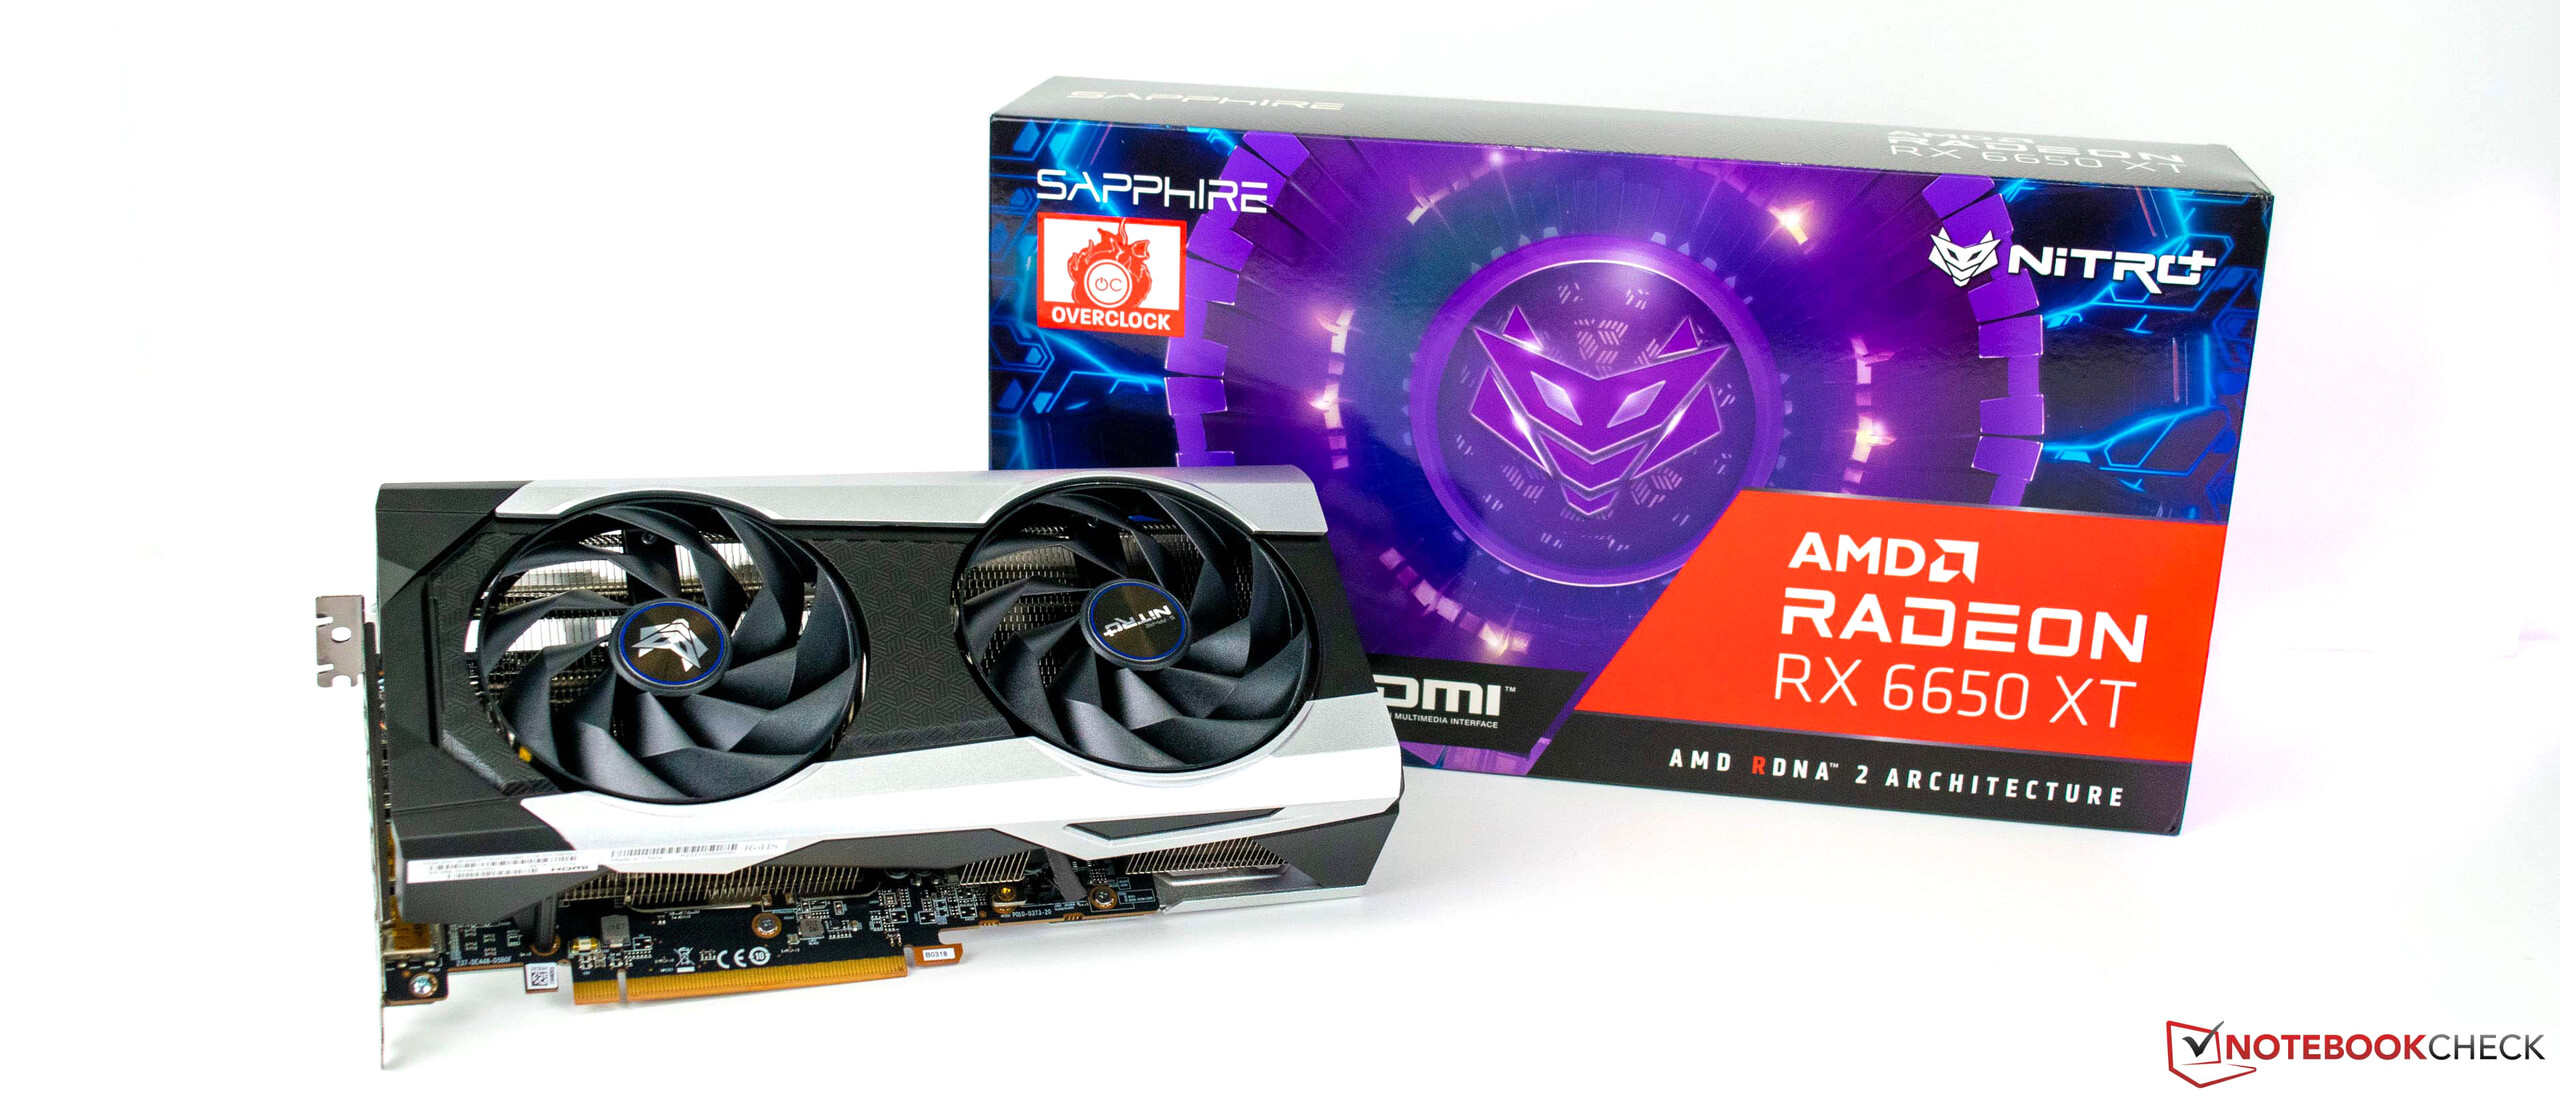 AMD's unannounced Radeon RX 7800 XT detailed by PowerColor